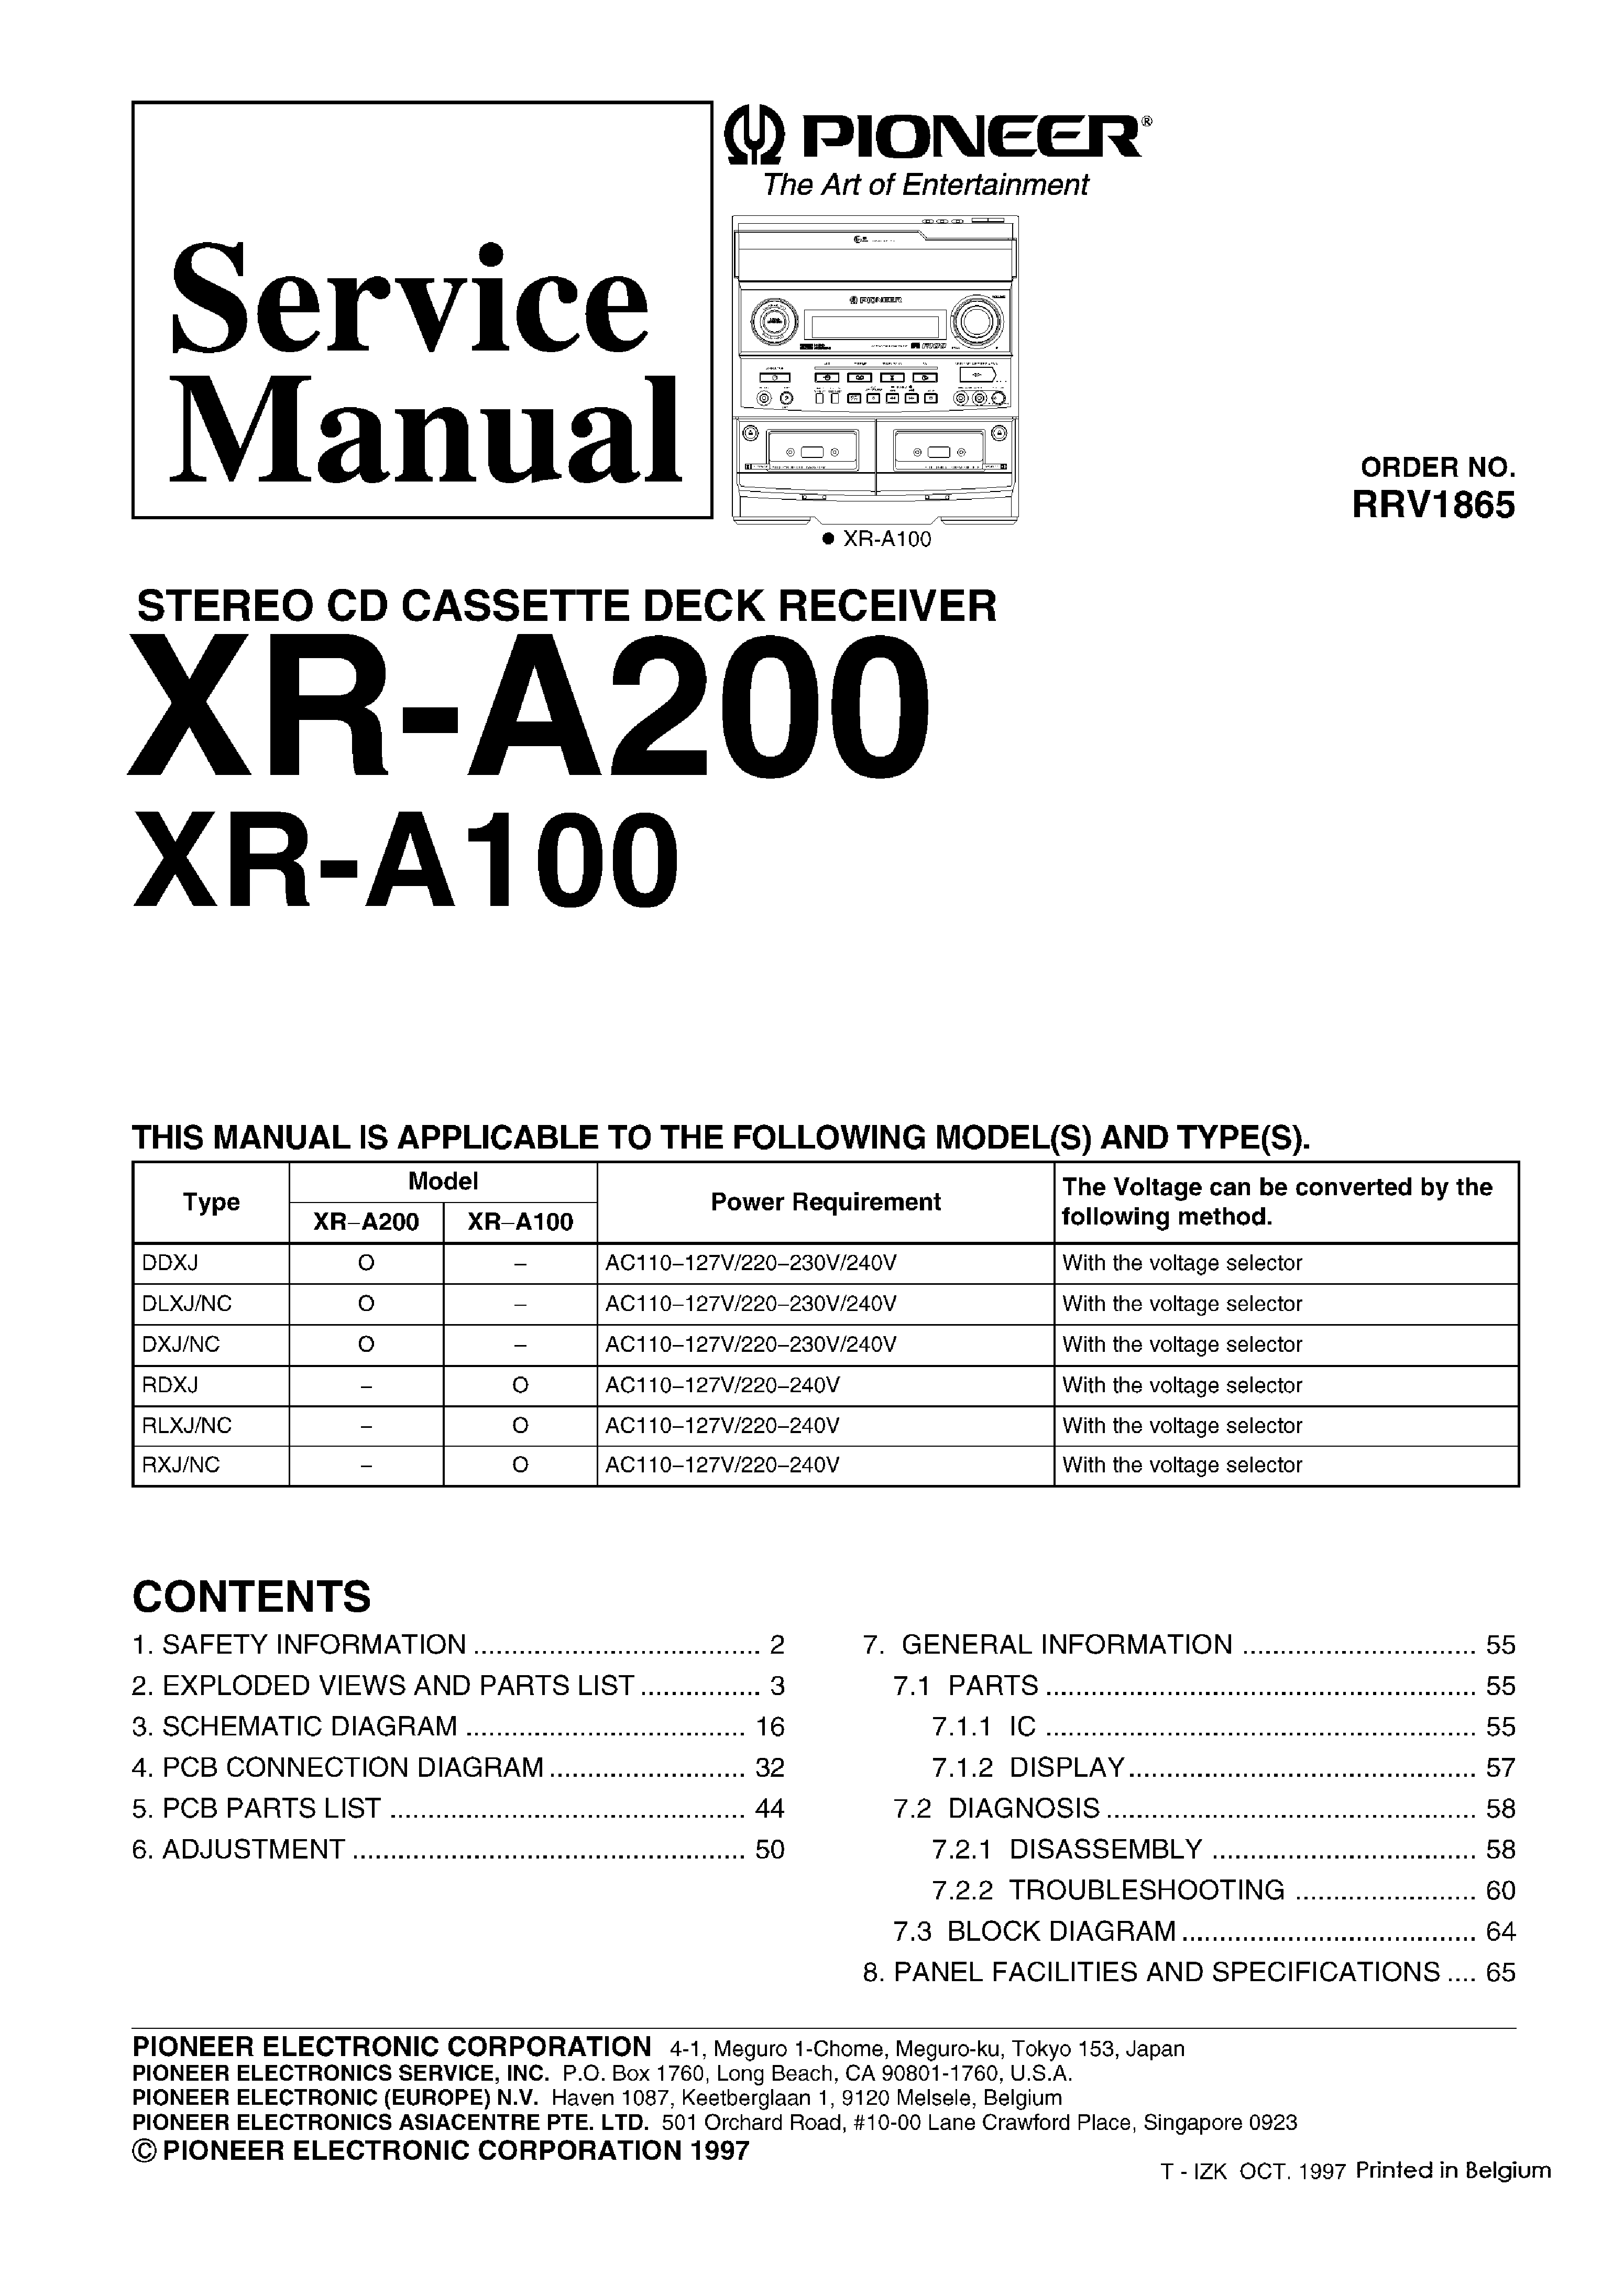 PIONEER XRA200 100 service manual (1st page)